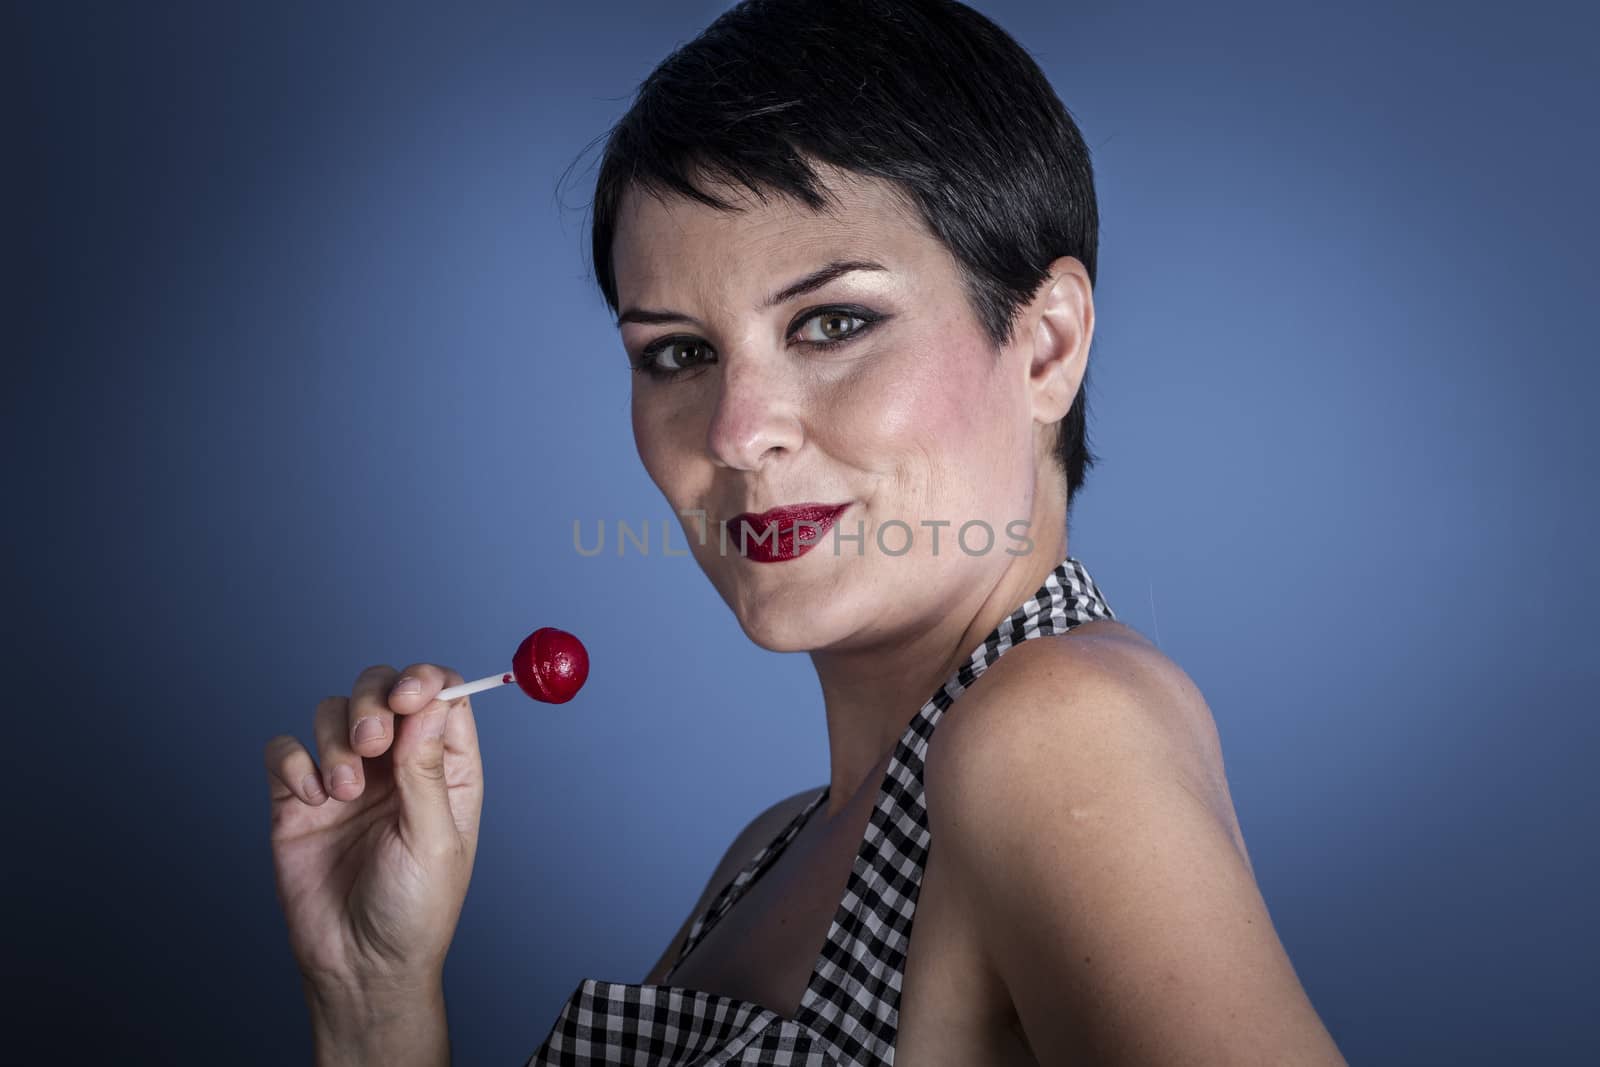 happy young woman with lollypop in her mouth on blue background by FernandoCortes